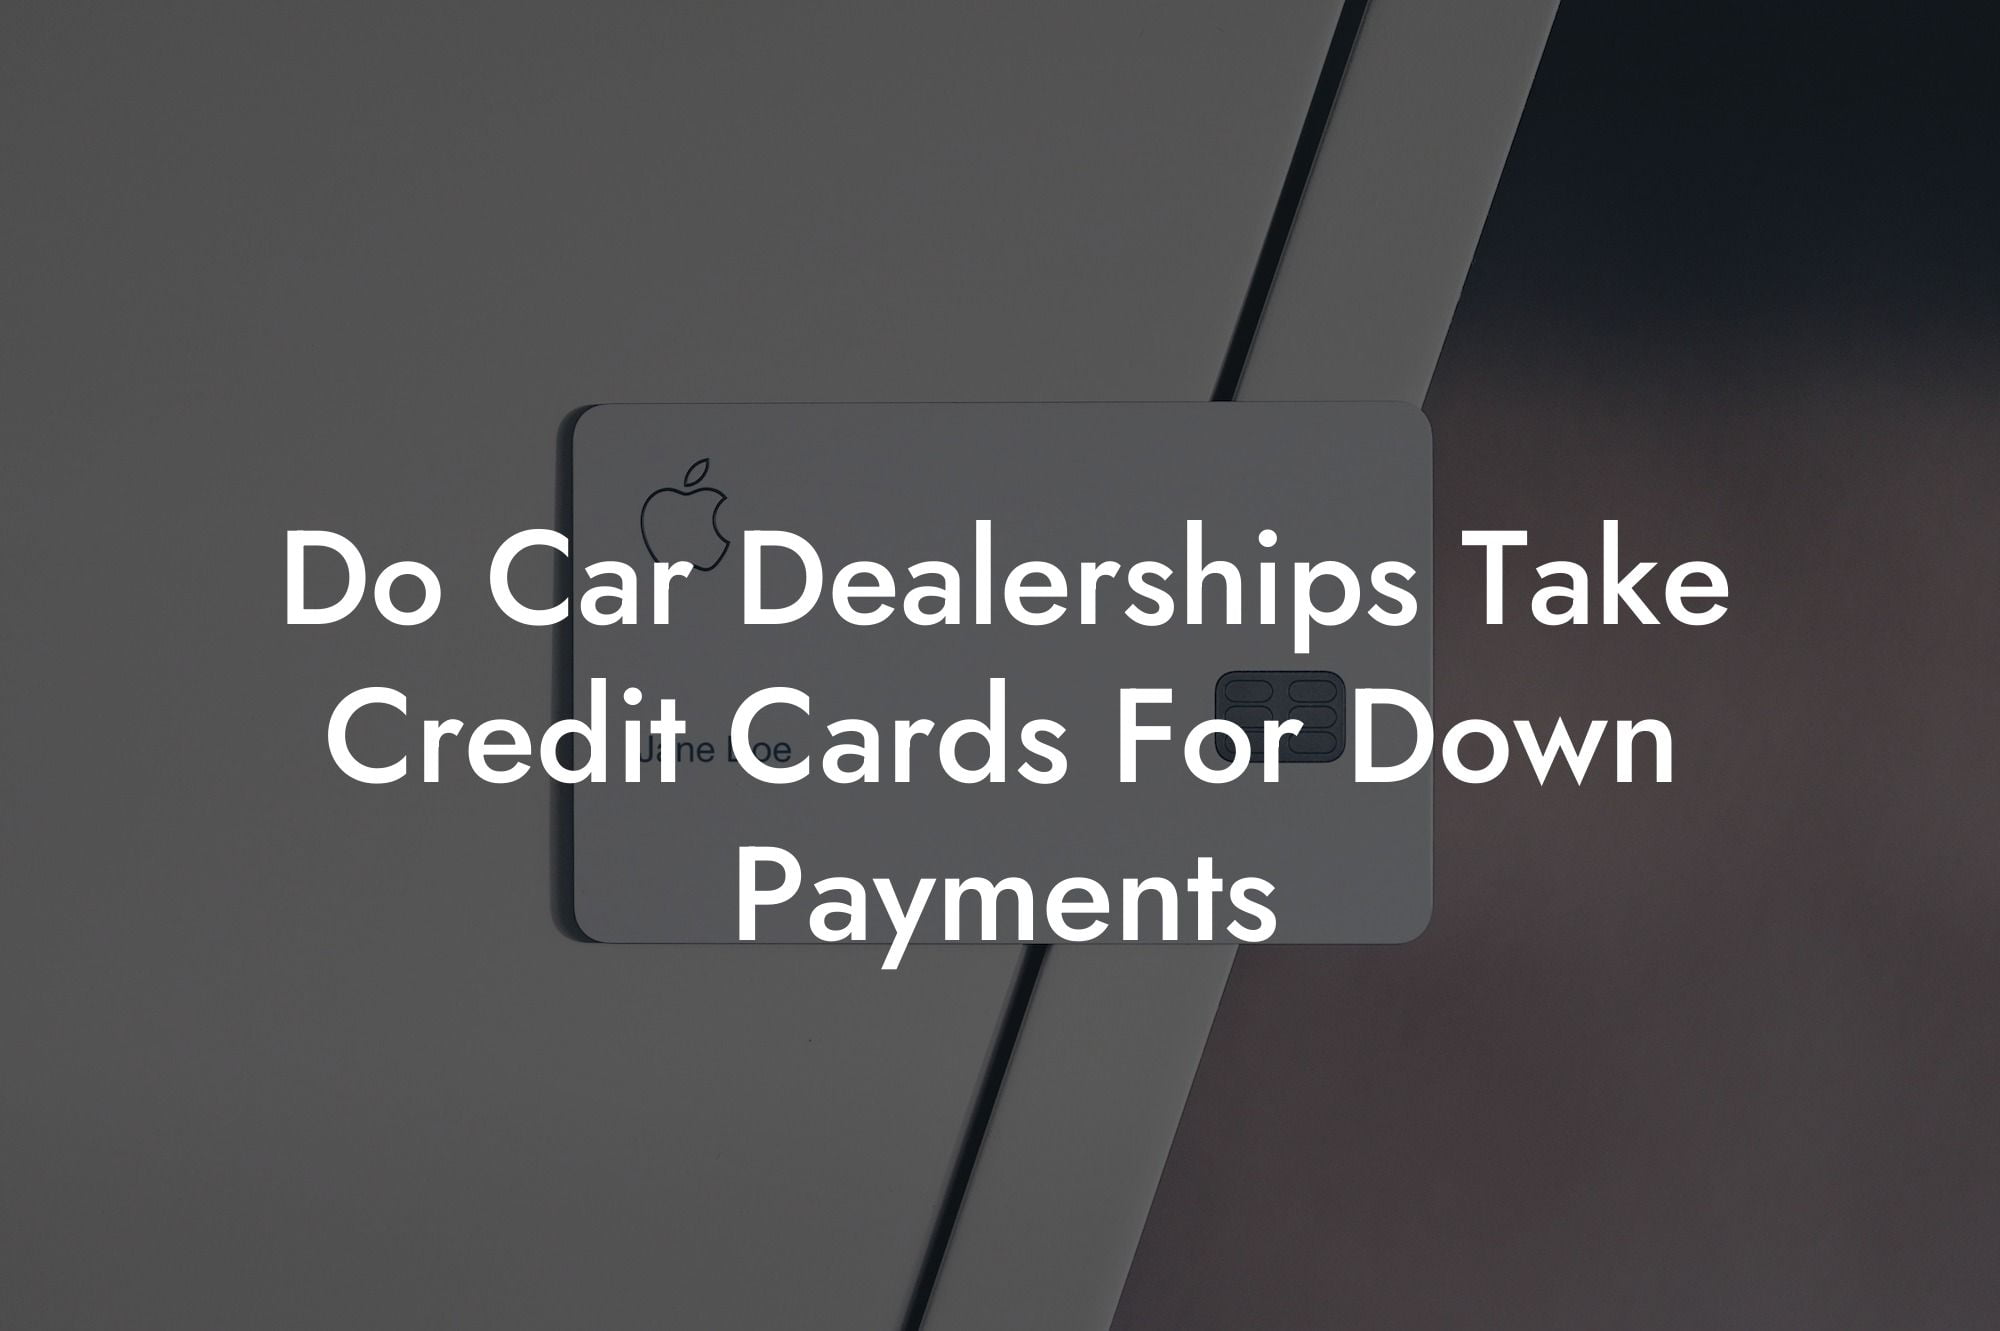 Do Car Dealerships Take Credit Cards For Down Payments